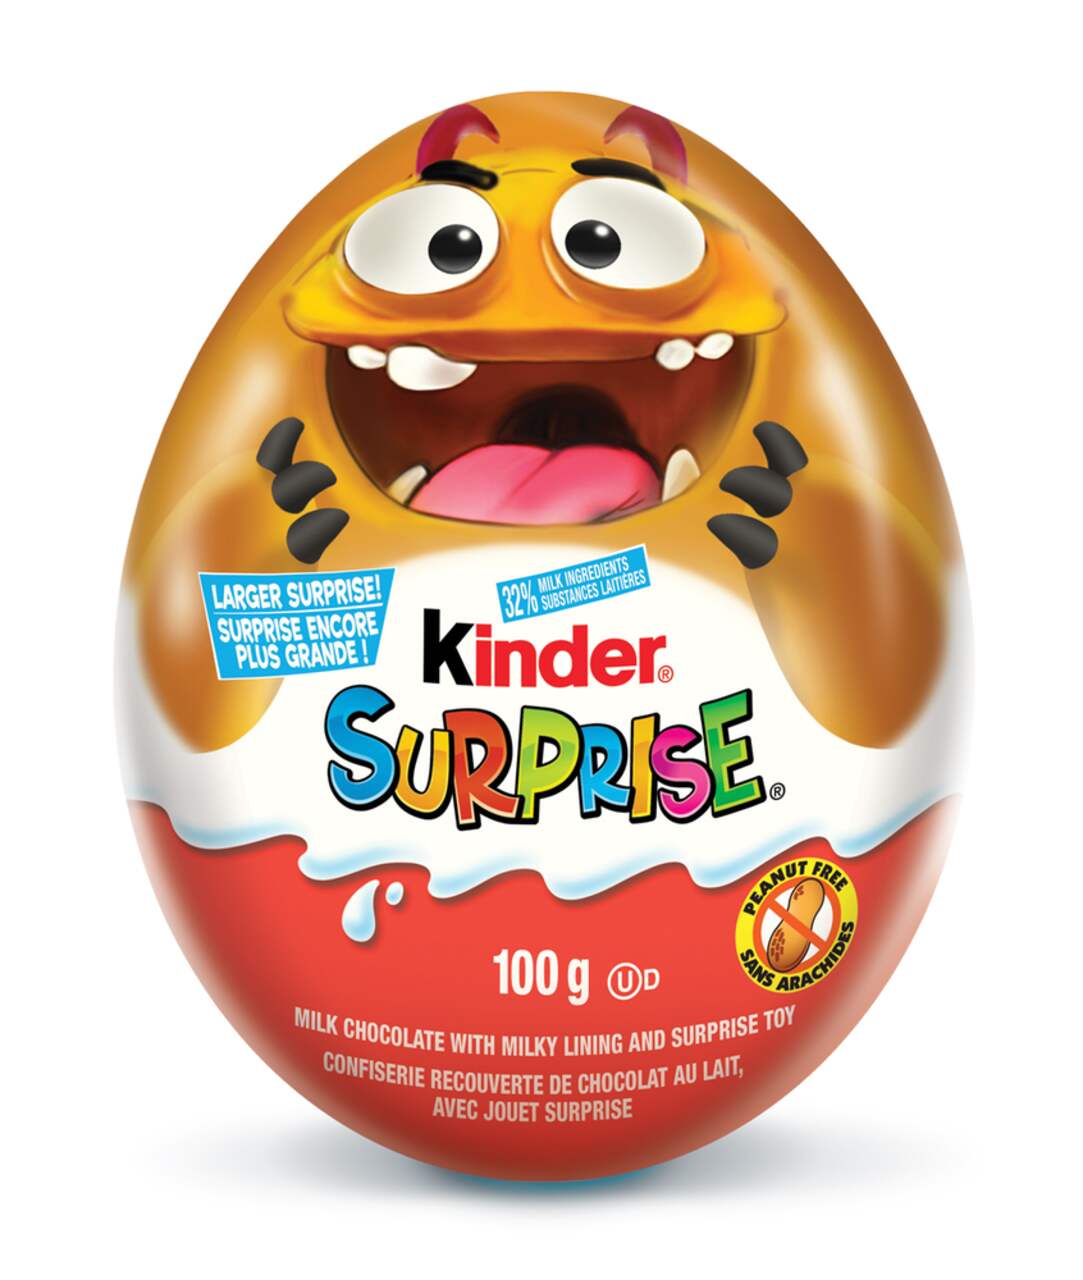 Kinder Surprise Giant Monster Egg, Milk Chocolate, Brown, 100-g, Candy for  Halloween